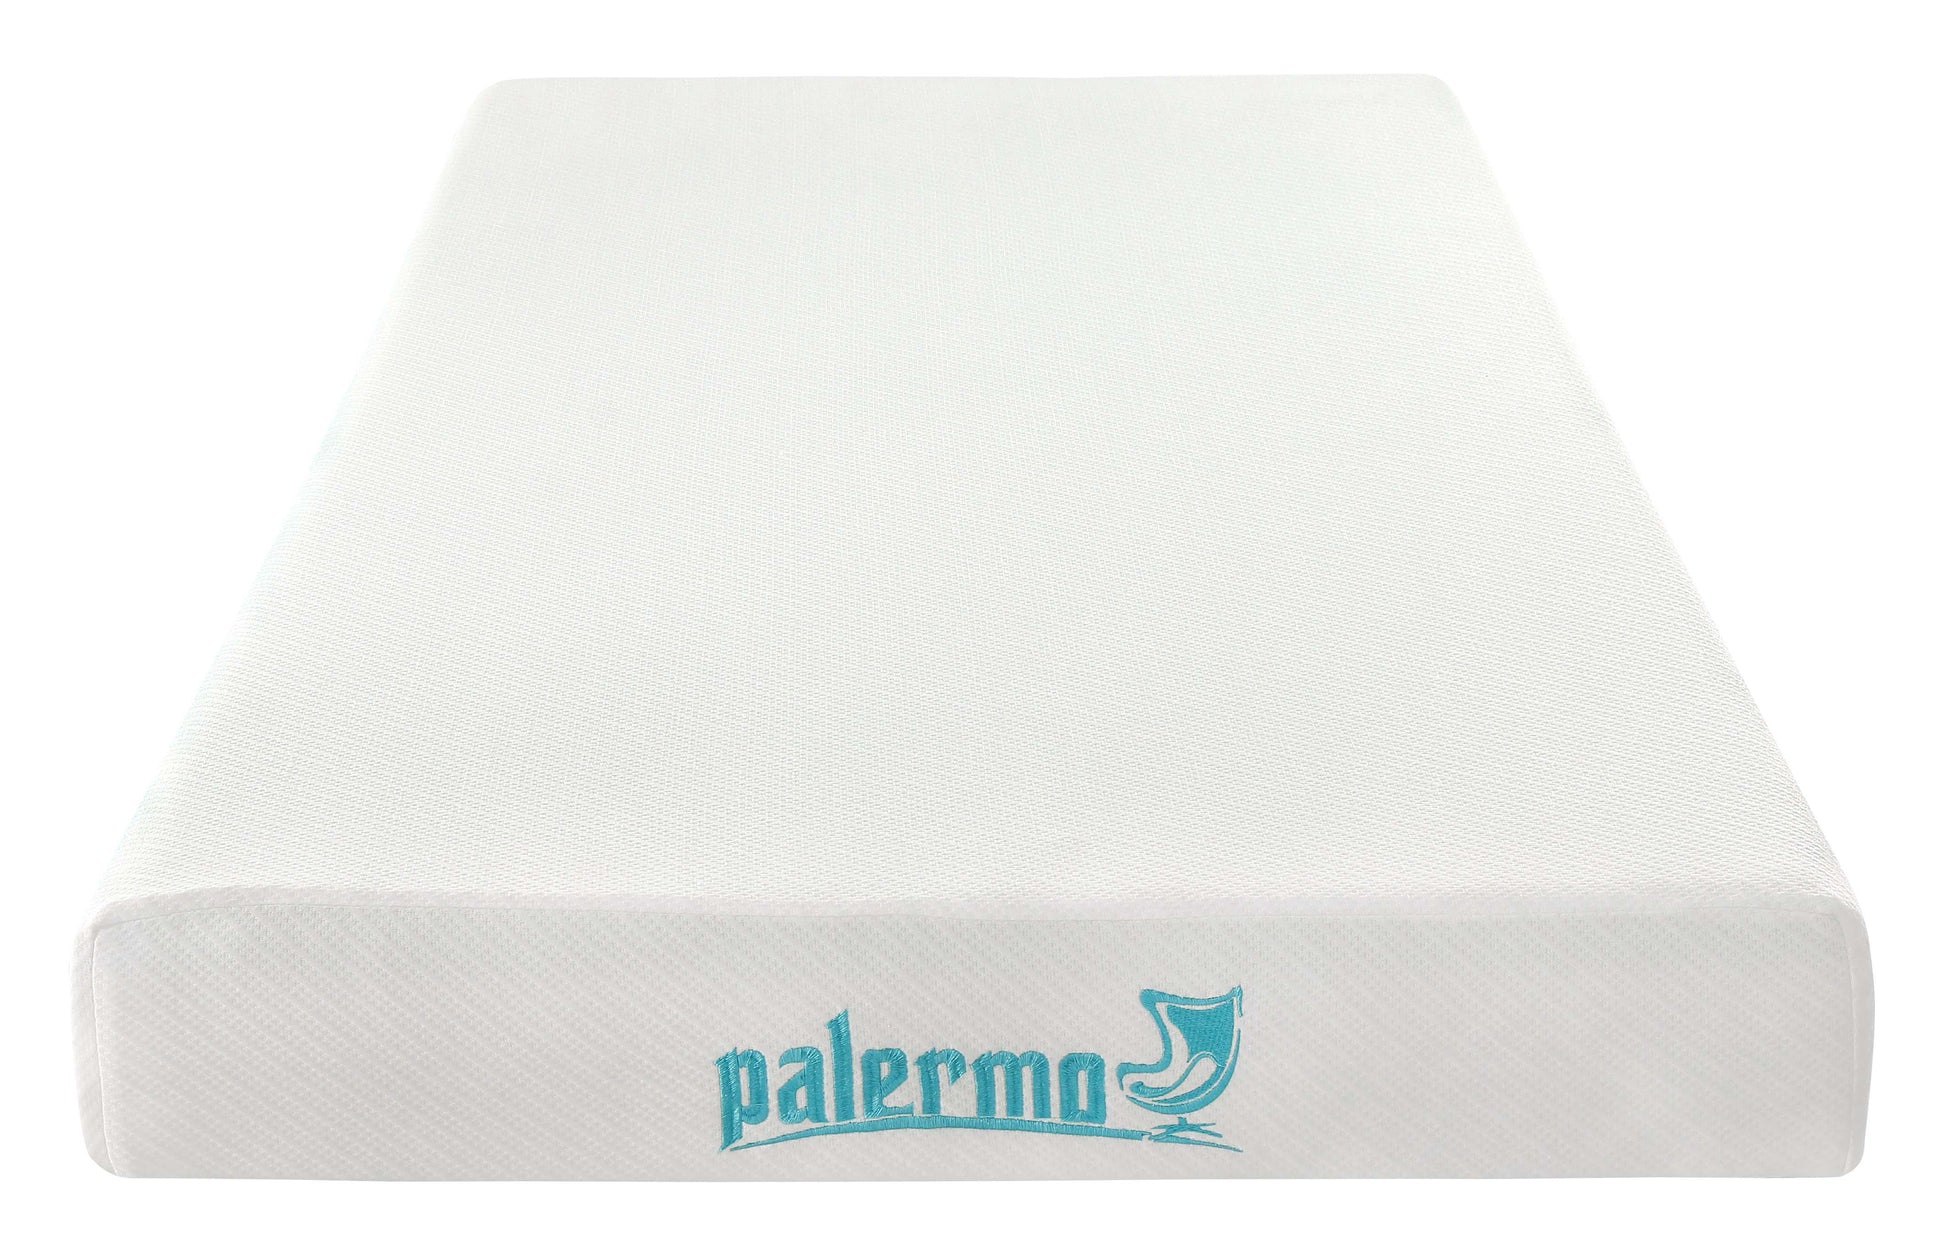 Palermo Single Mattress Memory Foam Green Tea Infused CertiPUR Approved - image2